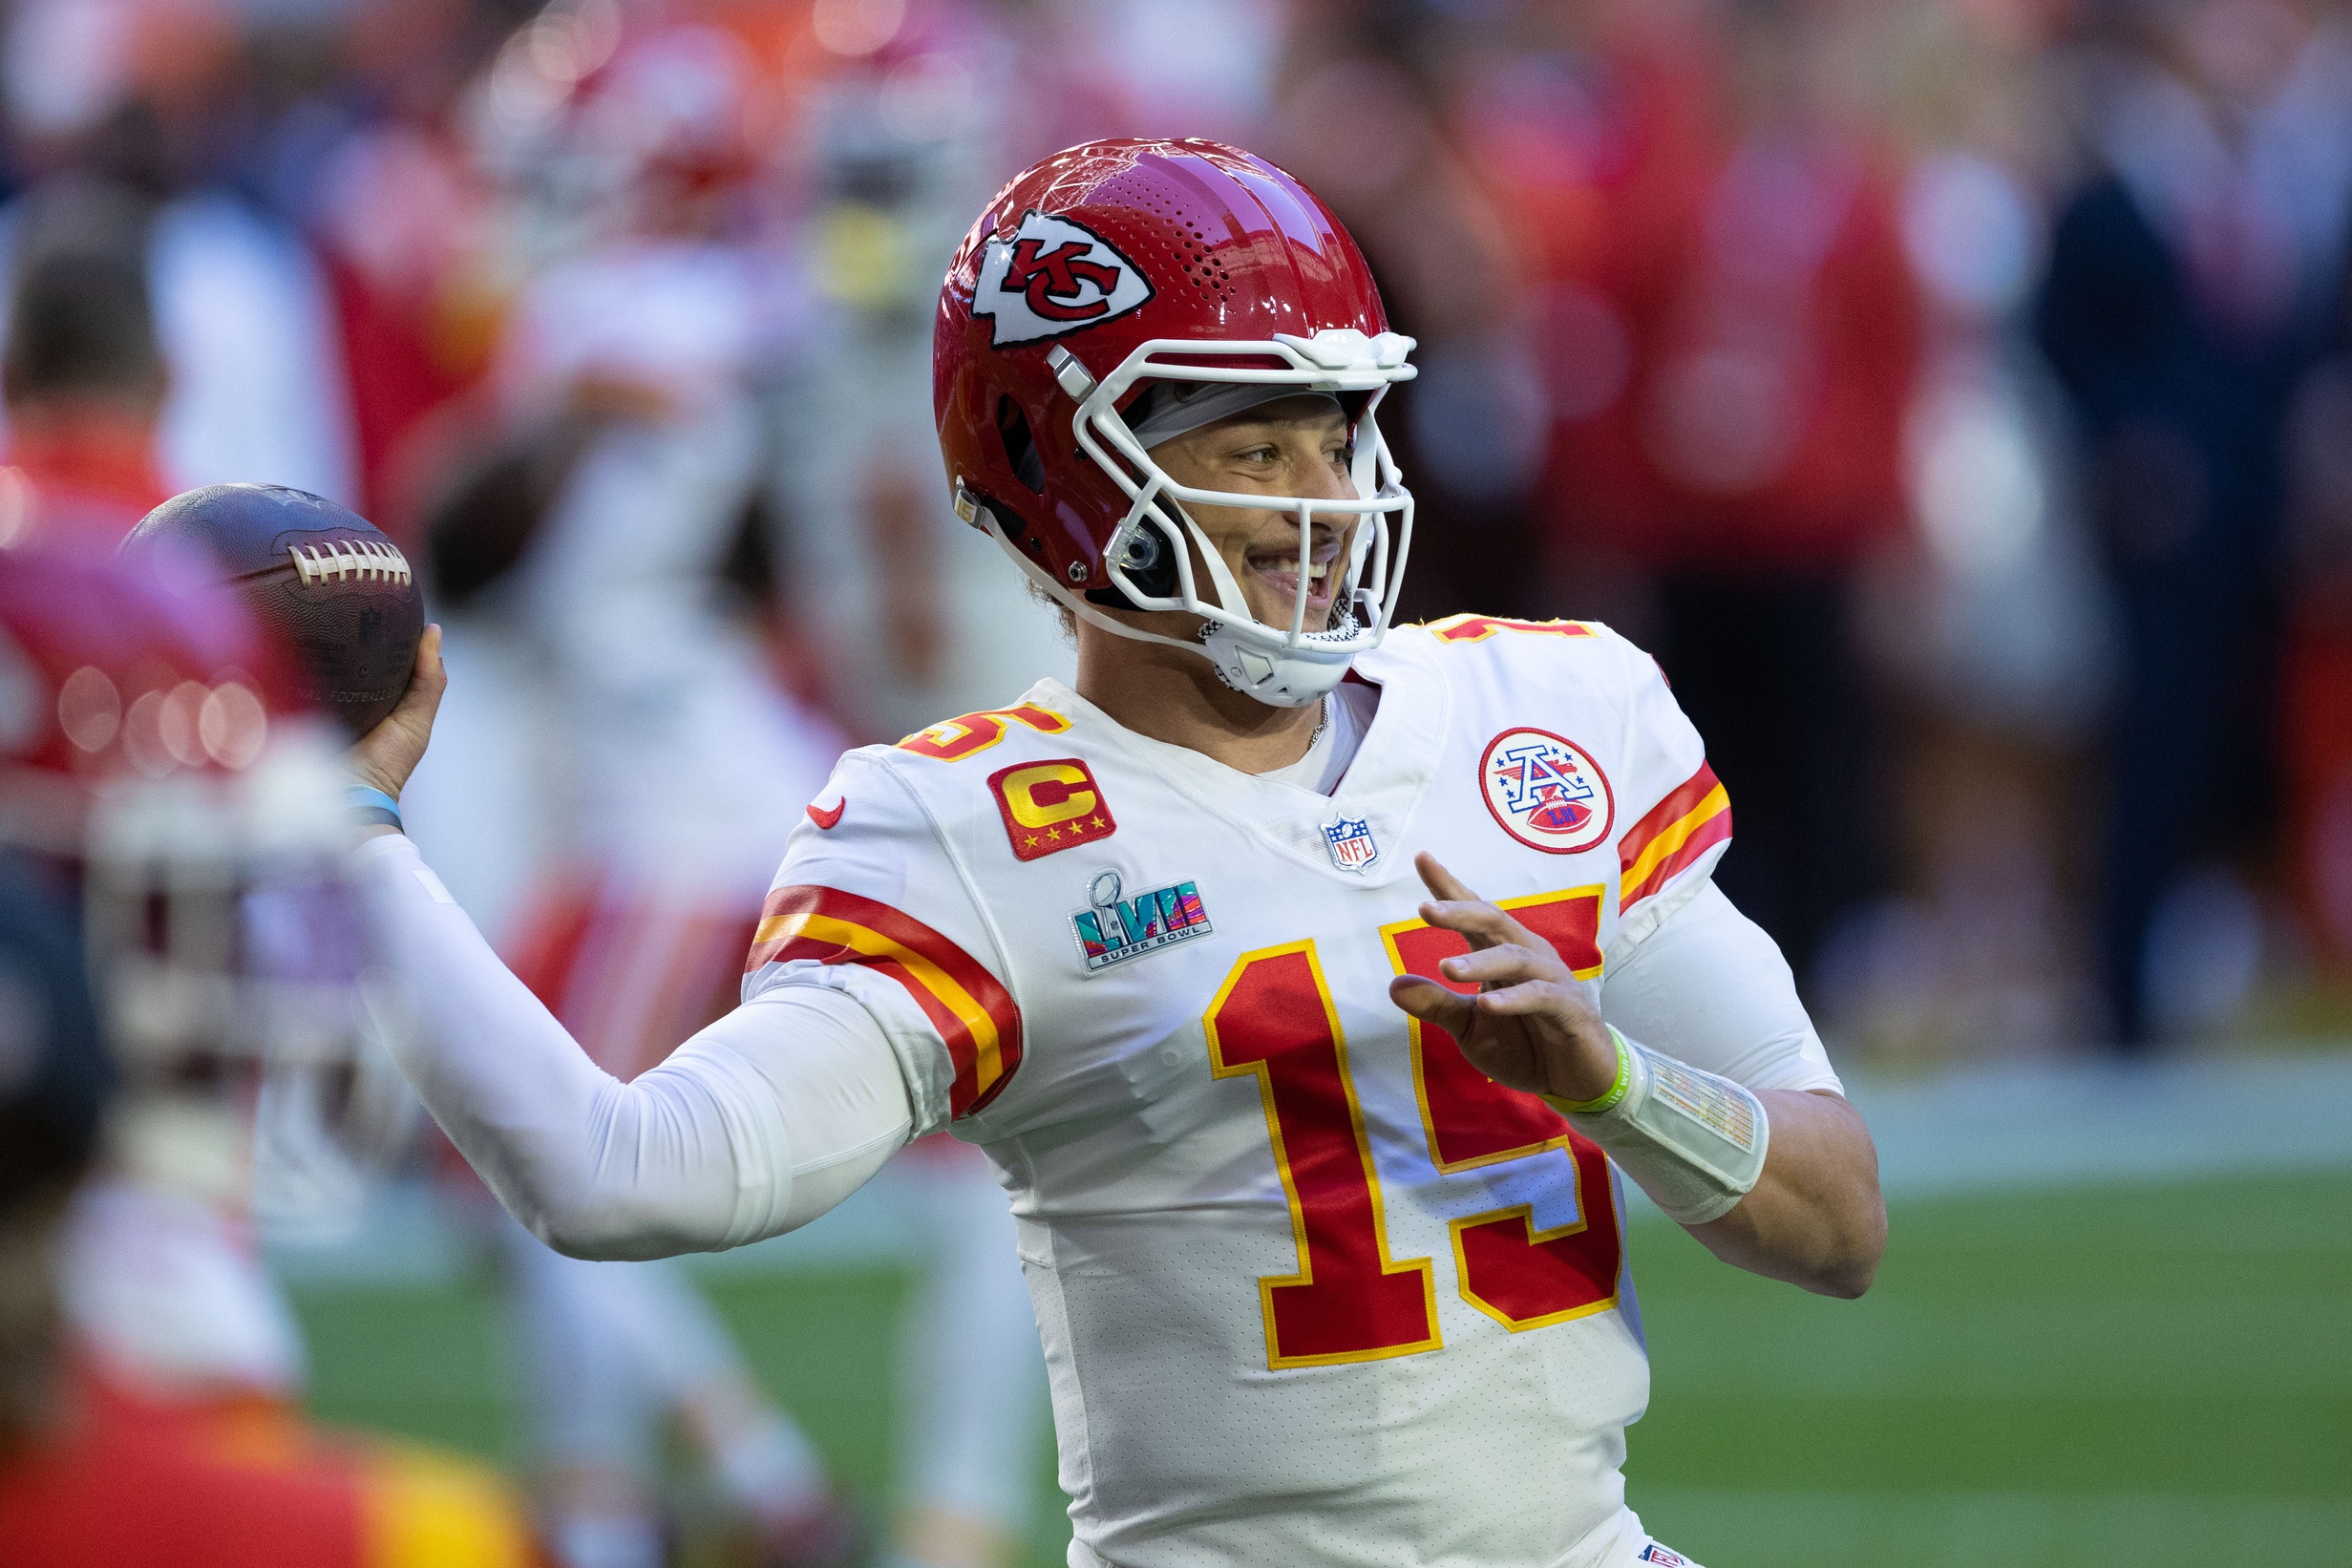 Patrick Mahomes: 5 Things to Know About the Kansas City Chiefs QB